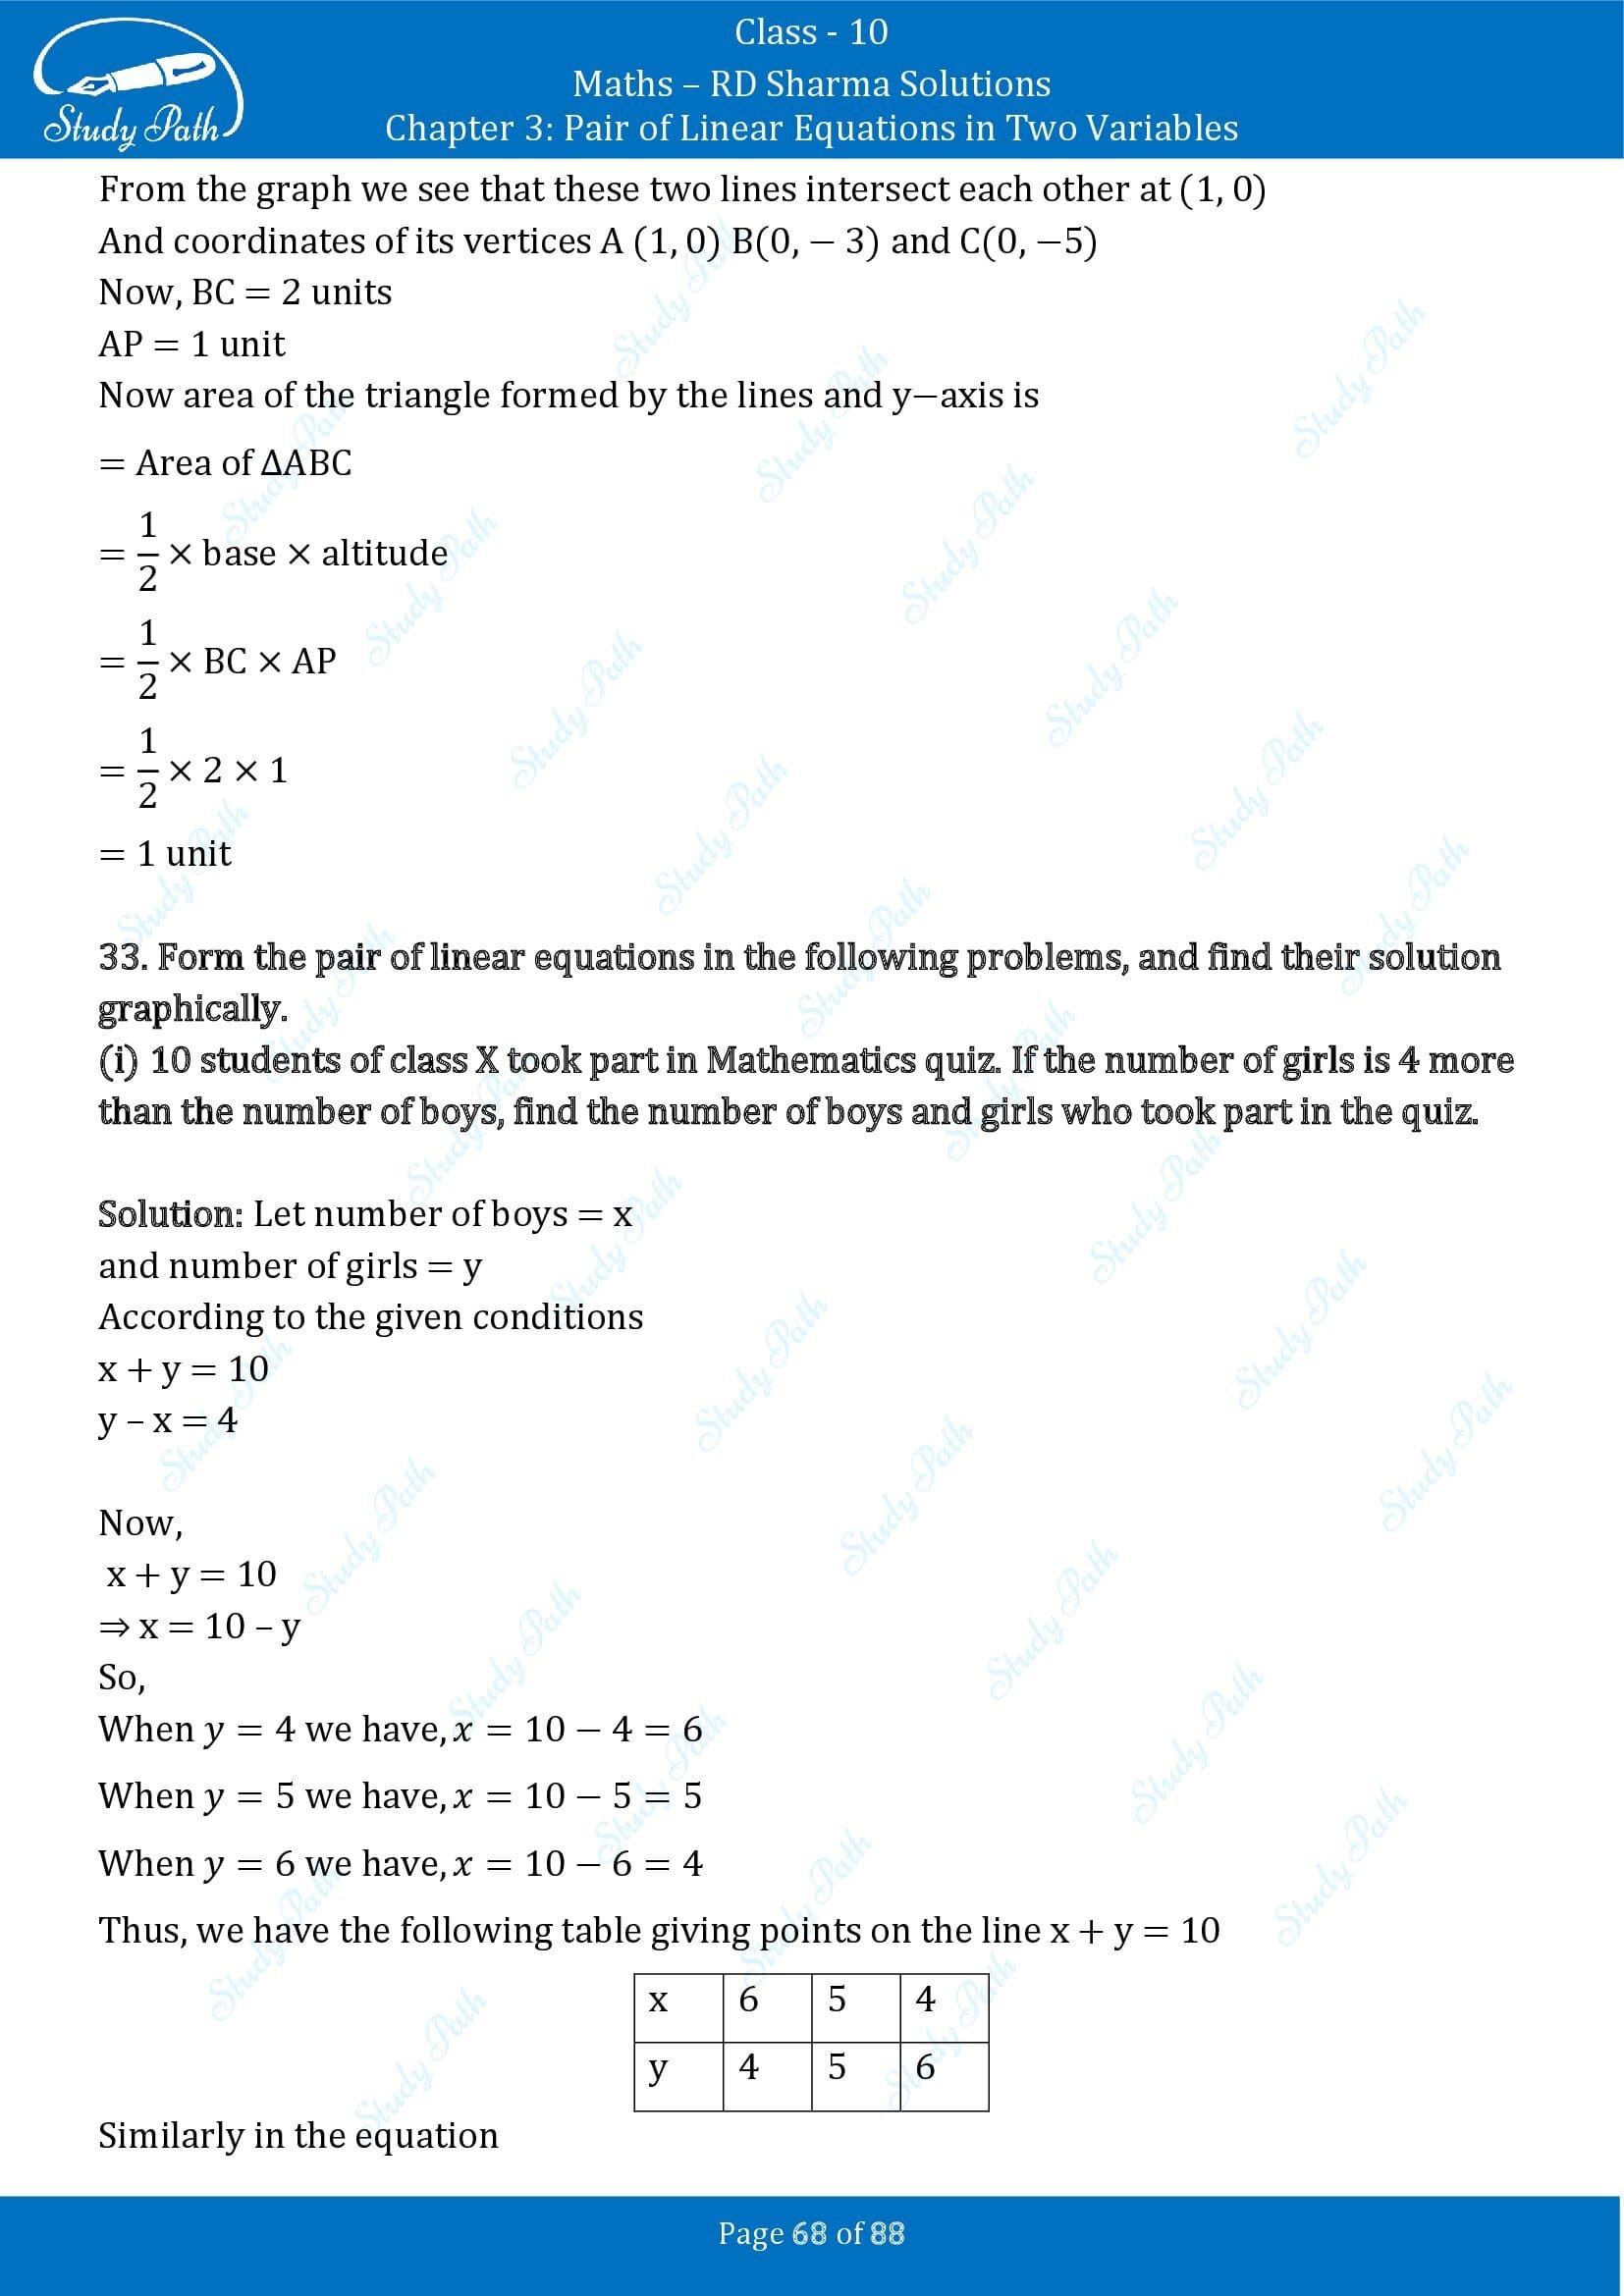 RD Sharma Solutions Class 10 Chapter 3 Pair of Linear Equations in Two Variables Exercise 3.2 00068